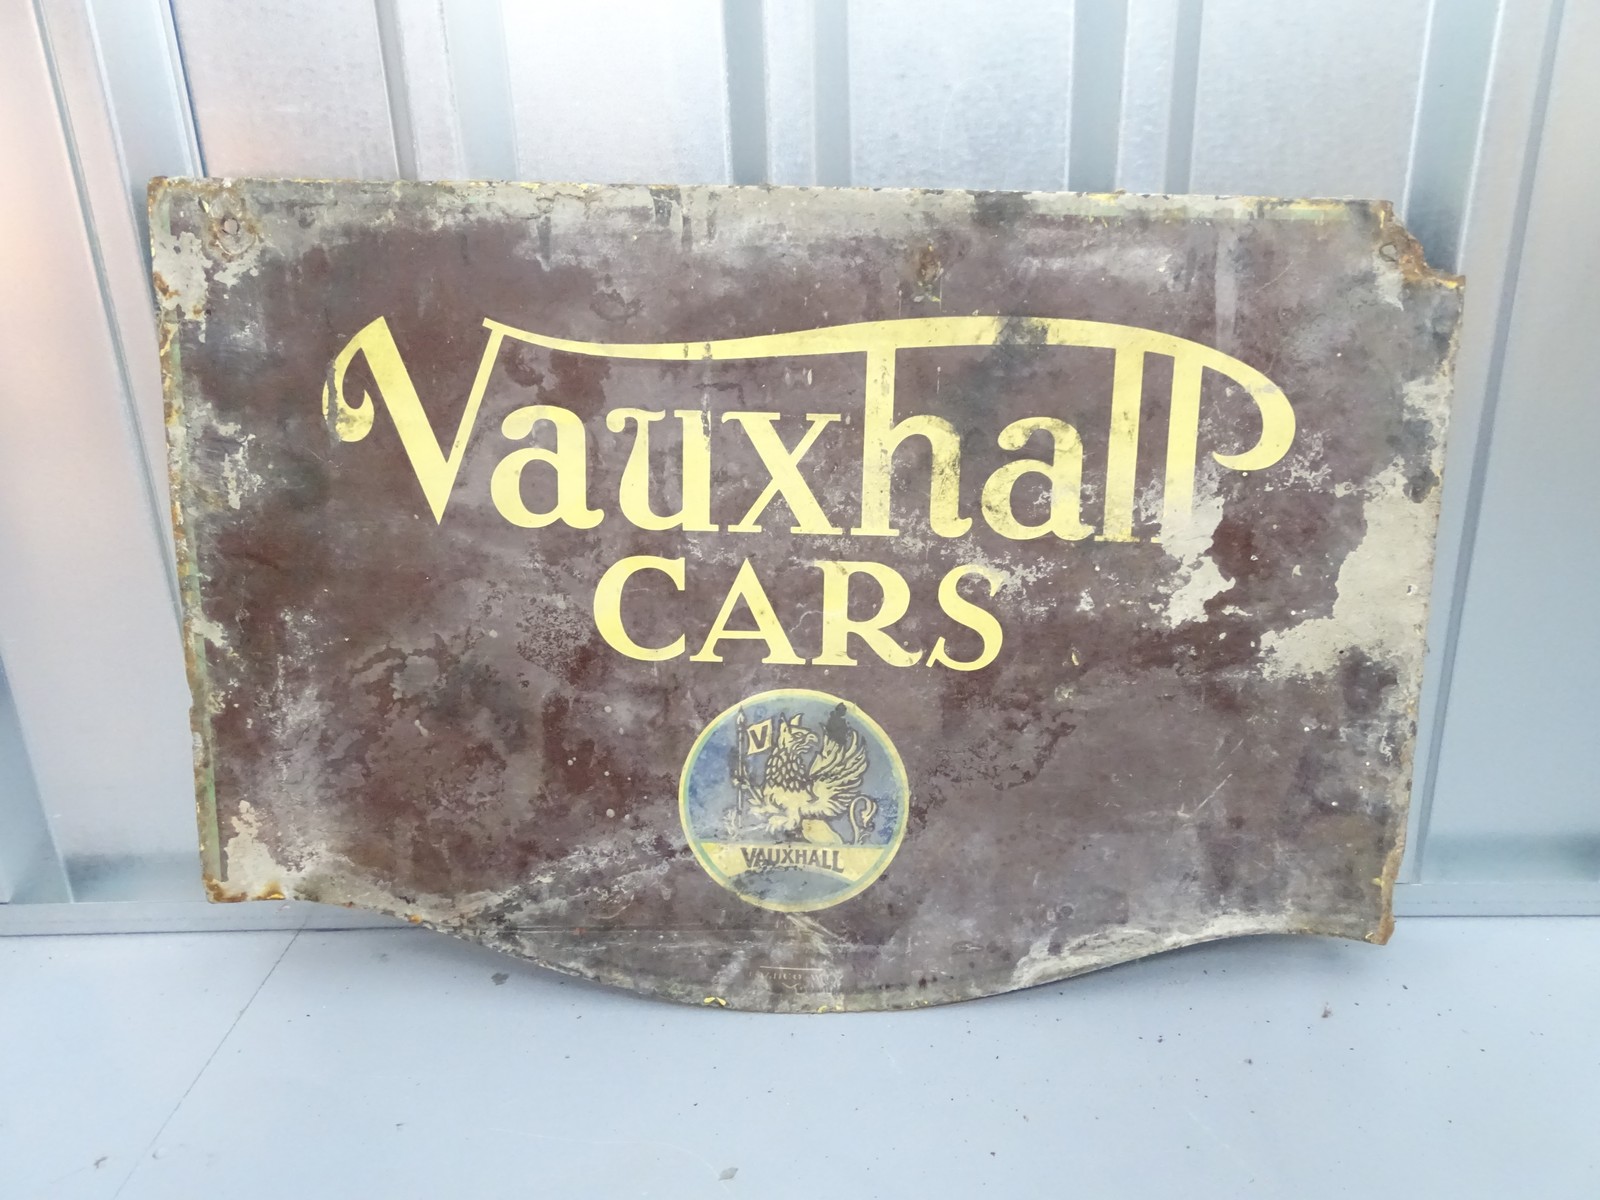 VAUXHALL CARS (30" x 20" at widest point) - enamel double sided advertising sign - Image 2 of 2